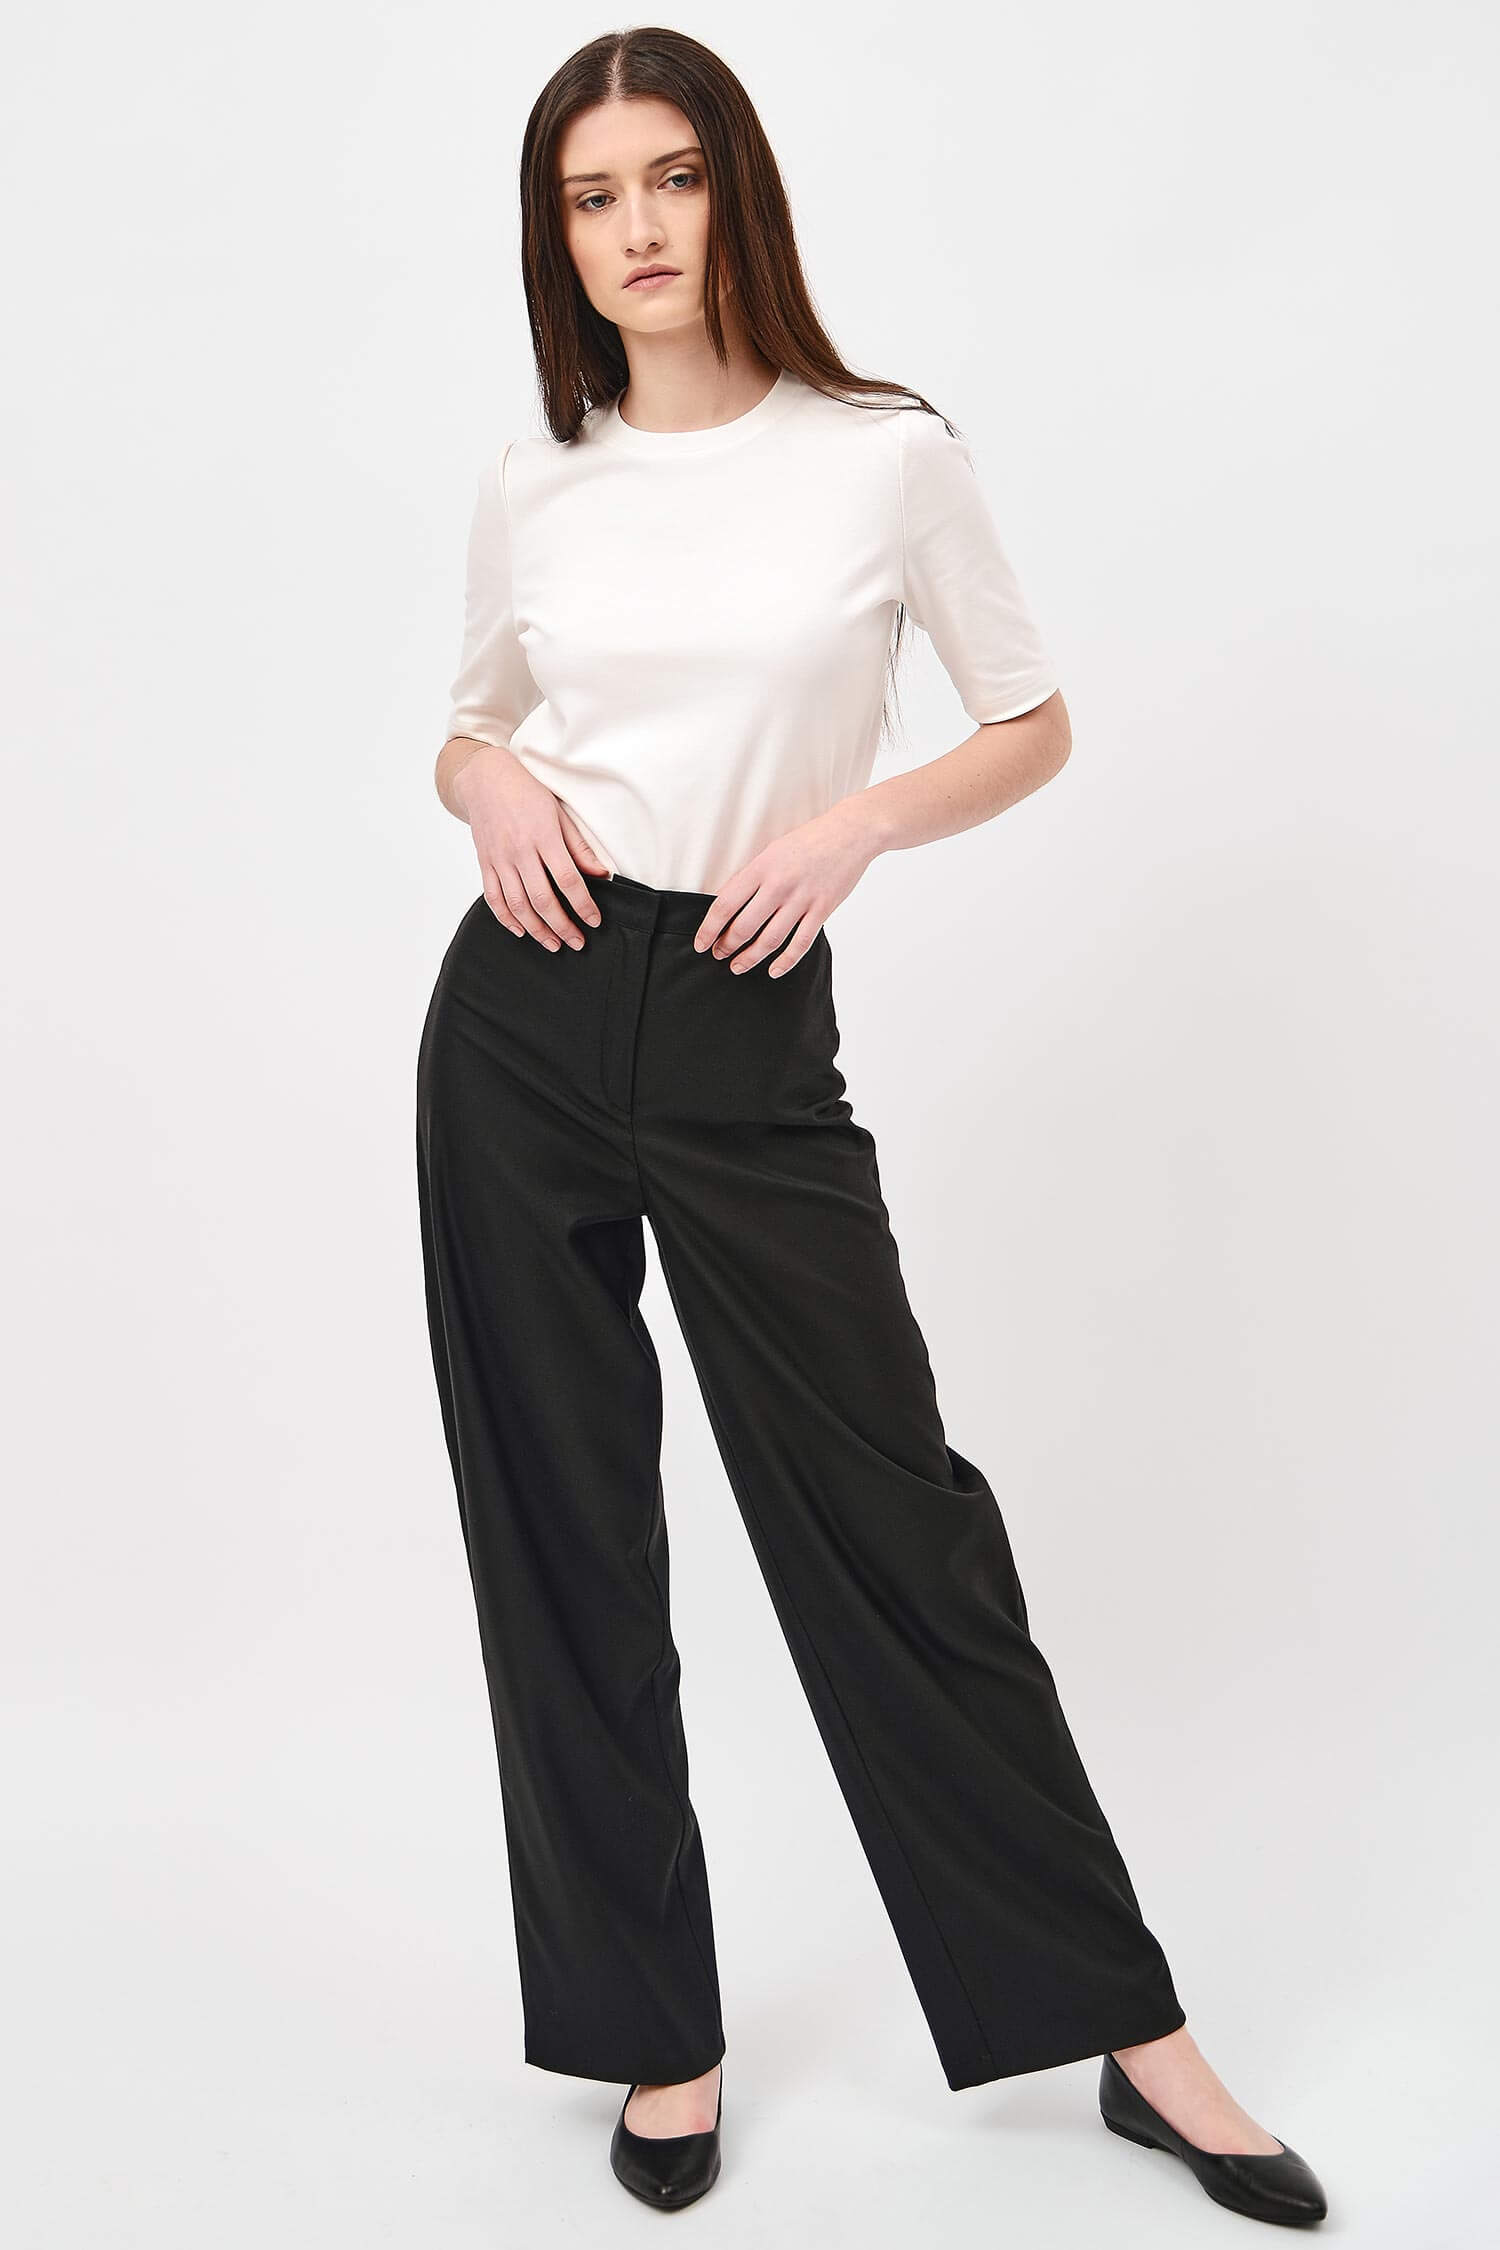 Buy Broadstar Women Black Wide Leg Loose Fit High-Rise Stretchable Formal  Trousers at Amazon.in